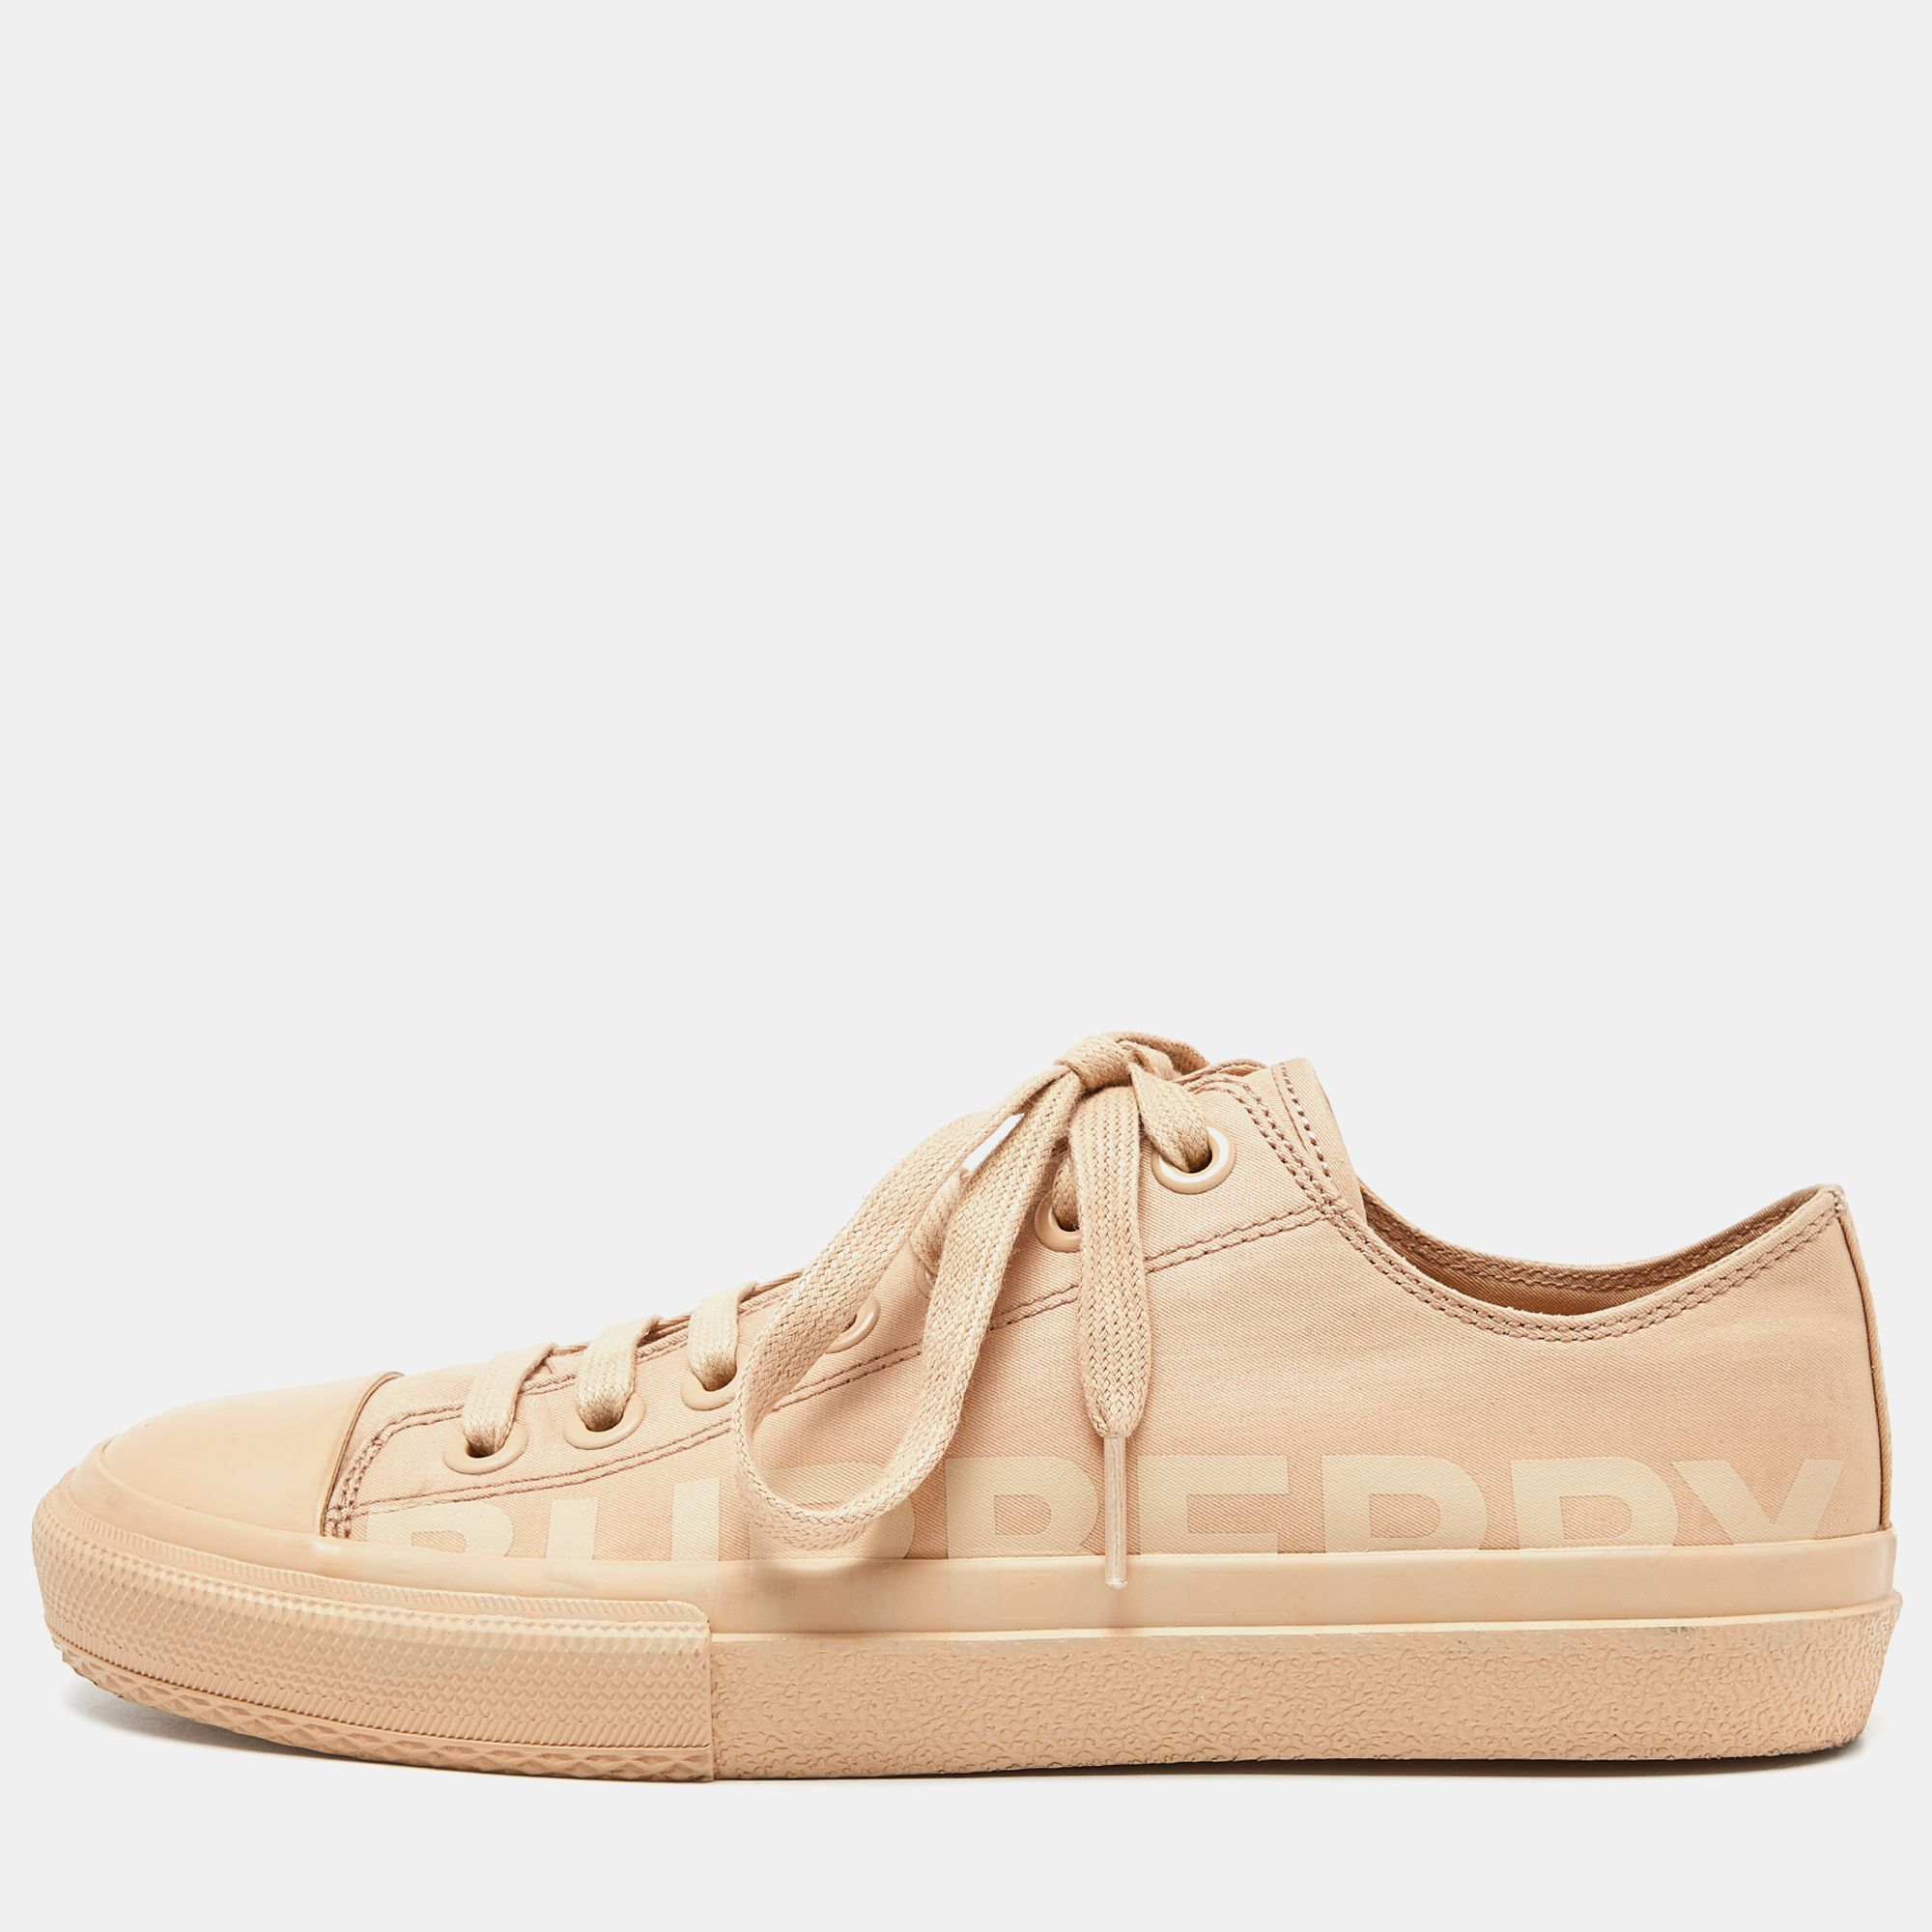 Pre-owned Burberry Beige Logo Print Canvas Sneakers Size 39